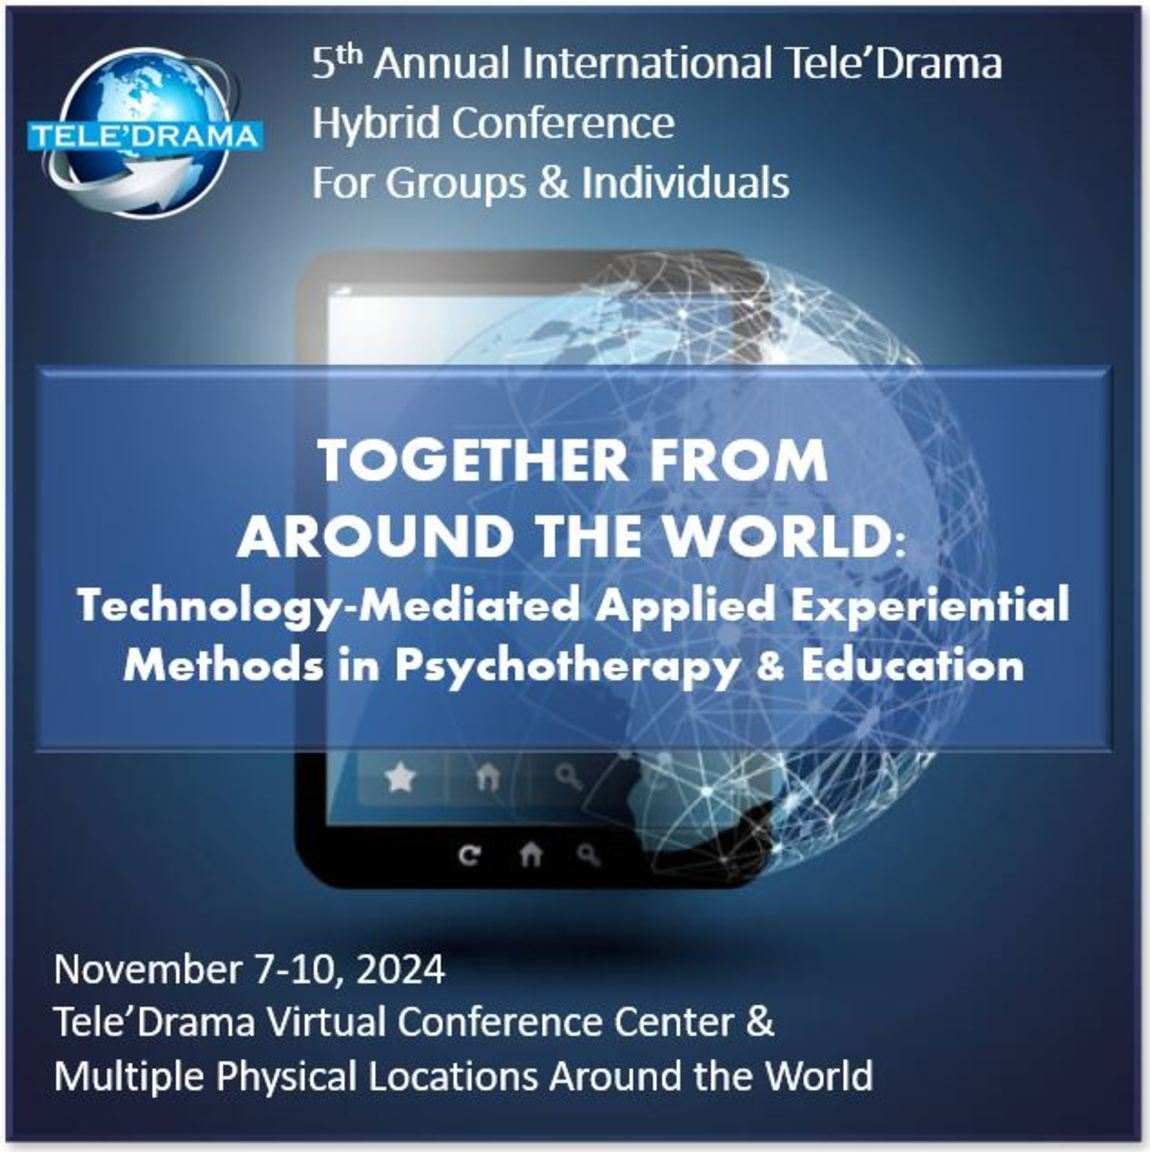 5th Annual International Tele’Drama Hybrid Conference For Groups & Individuals: TOGETHER FROM  AROUND THE WORLD: Technology-Mediated Applied Experiential Methods in Psychotherapy & Education